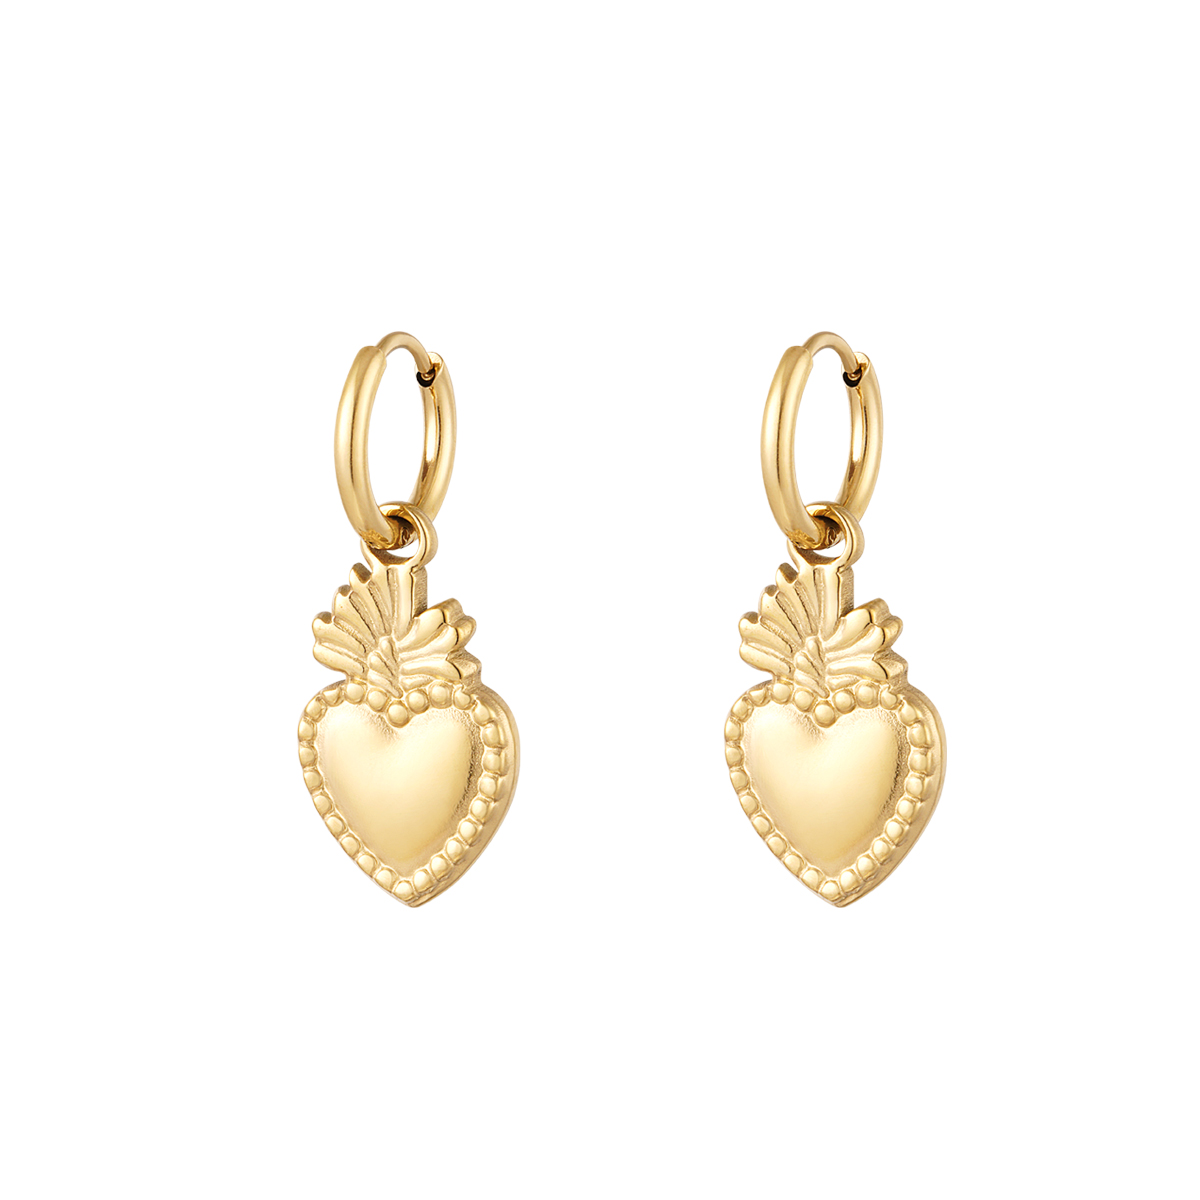 Earrings with heart and feather